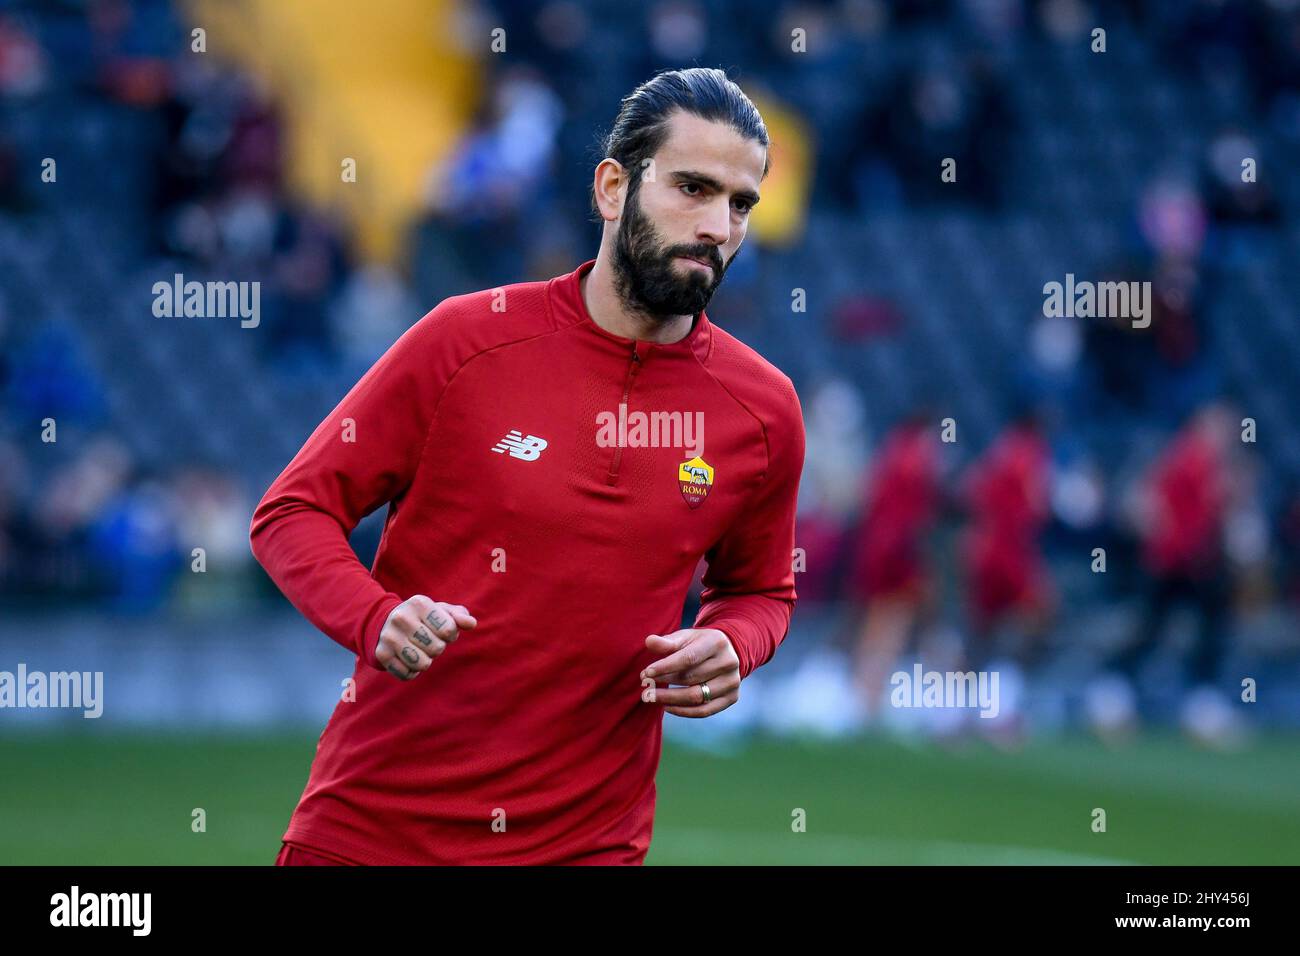 Udine, Italy. 13th Mar, 2022. Roma's Sergio Miguel Relvas De Oliveira  portrait during Udinese Calcio vs AS Roma, italian soccer Serie A match in  Udine, Italy, March 13 2022 Credit: Independent Photo